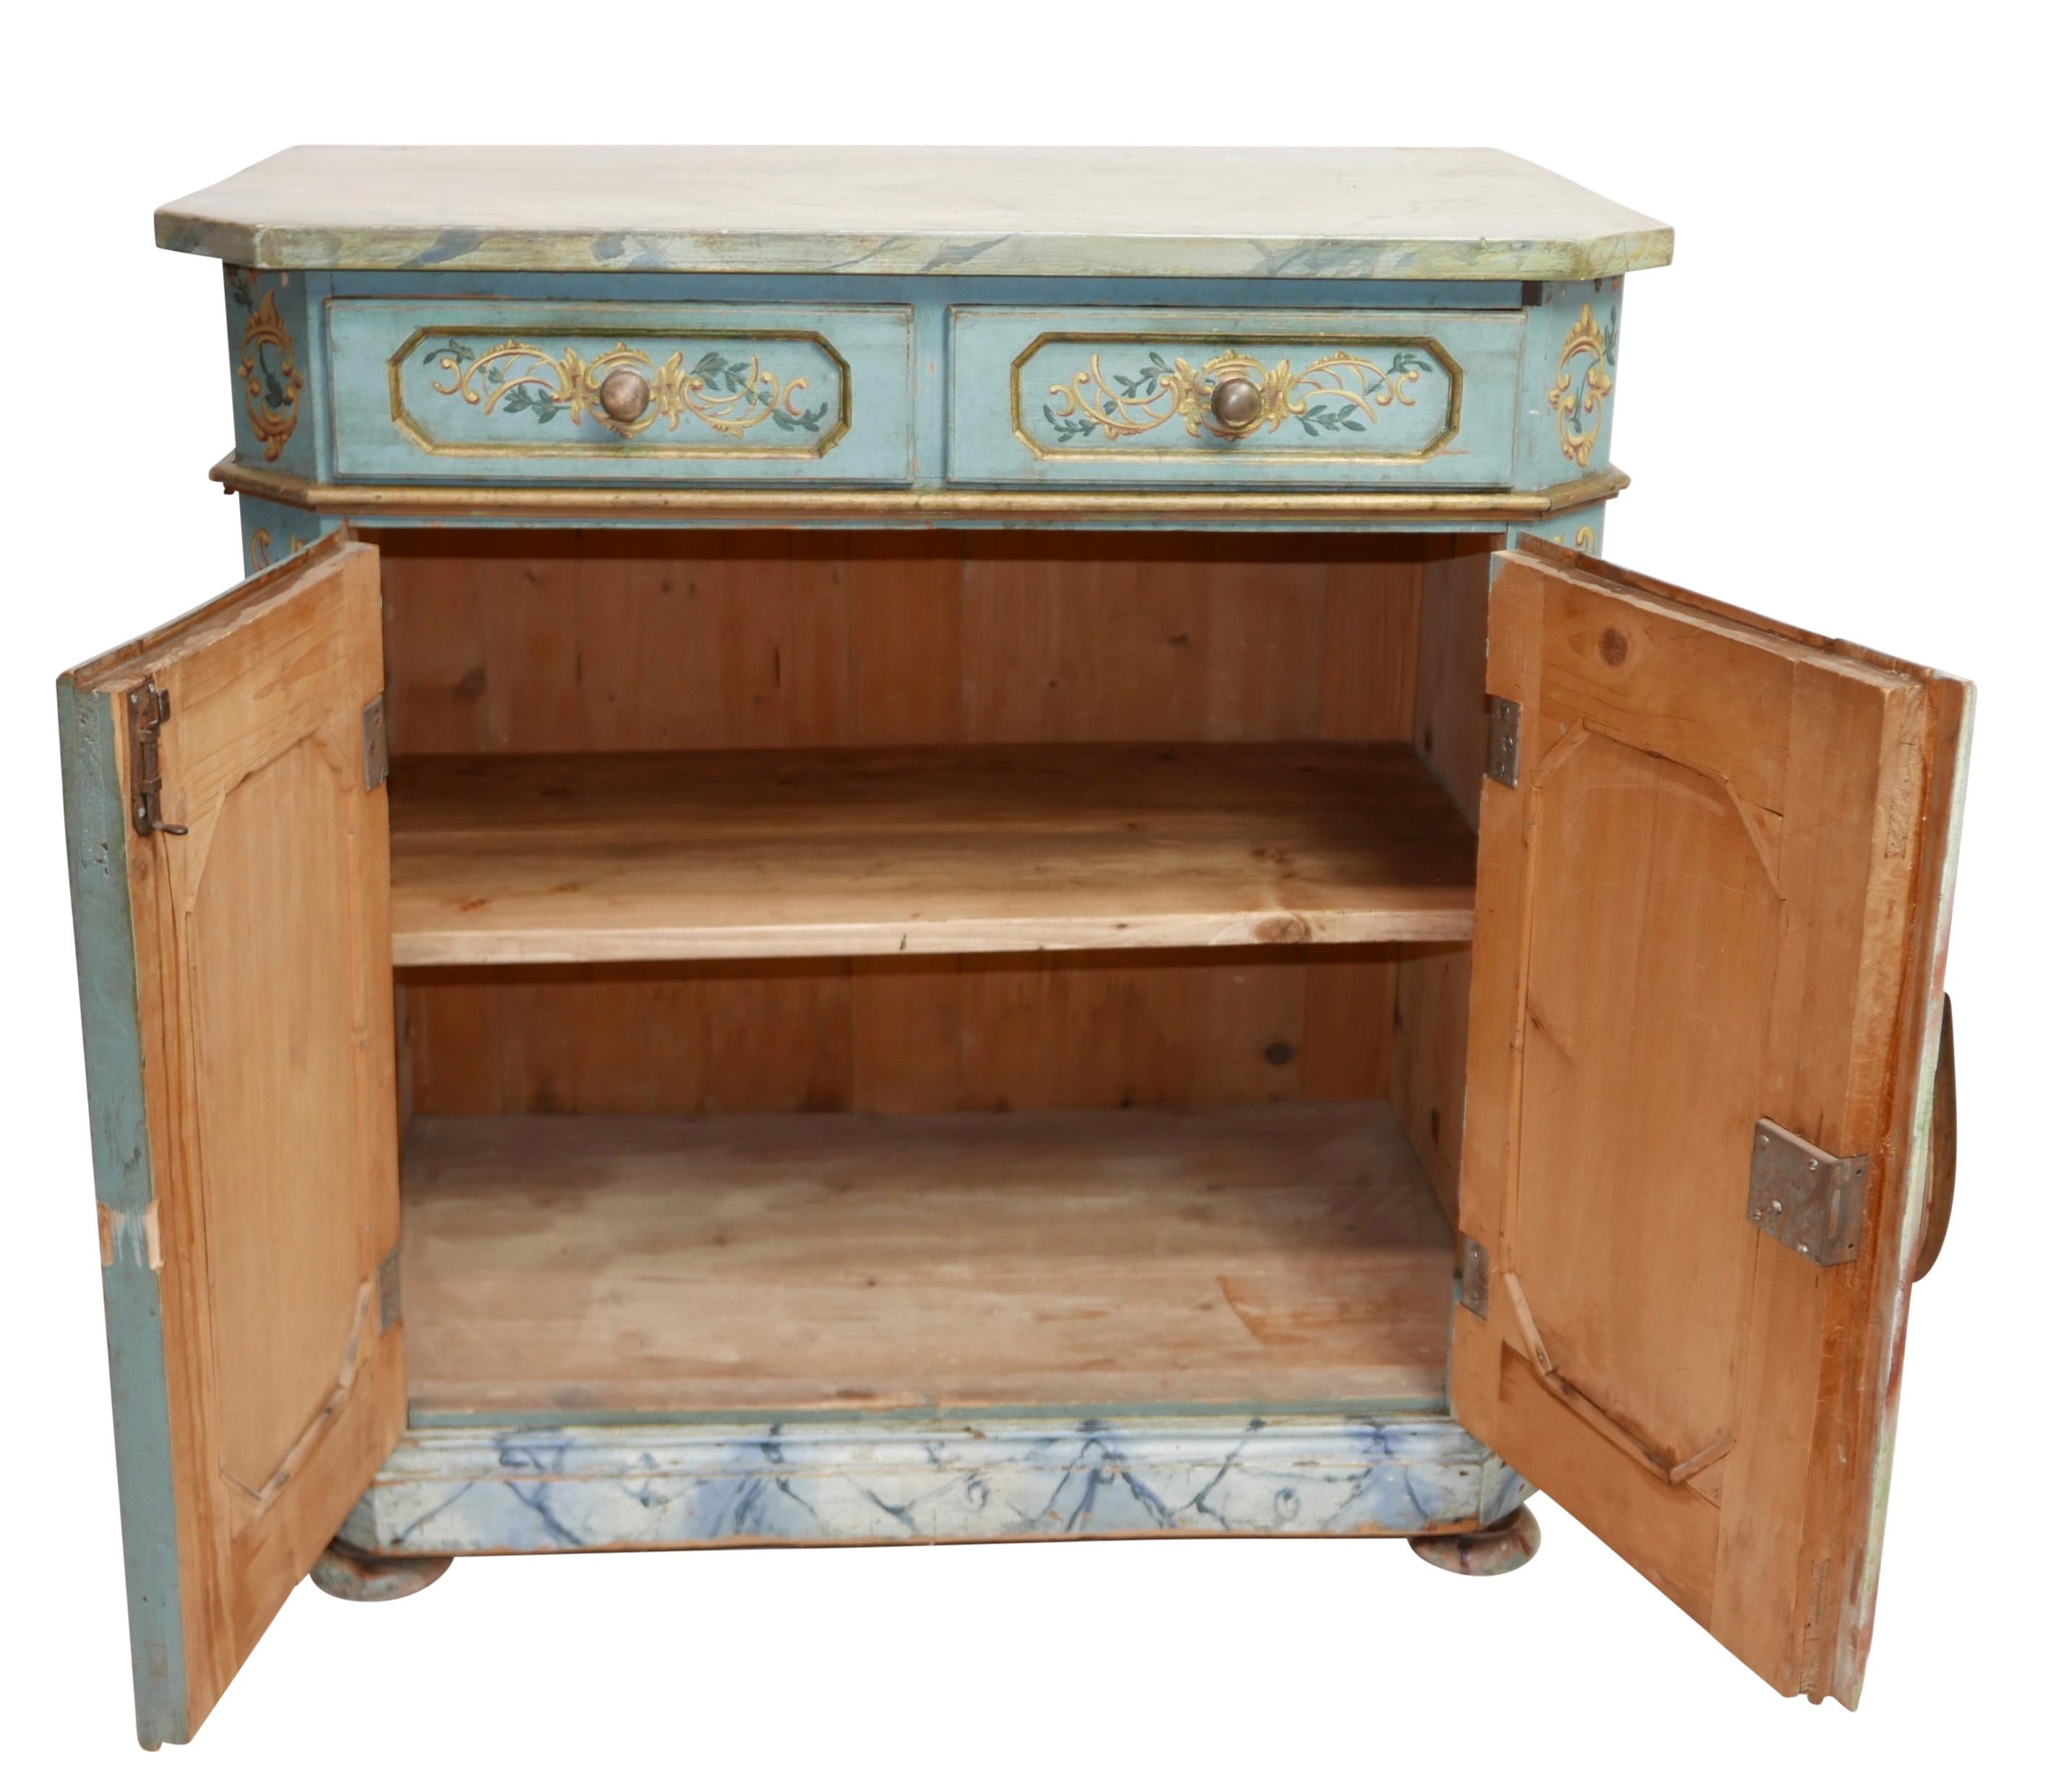 19th Century Hand Painted and Faux Marble Buffet Cabinet, Swiss or Swedish circa 1830